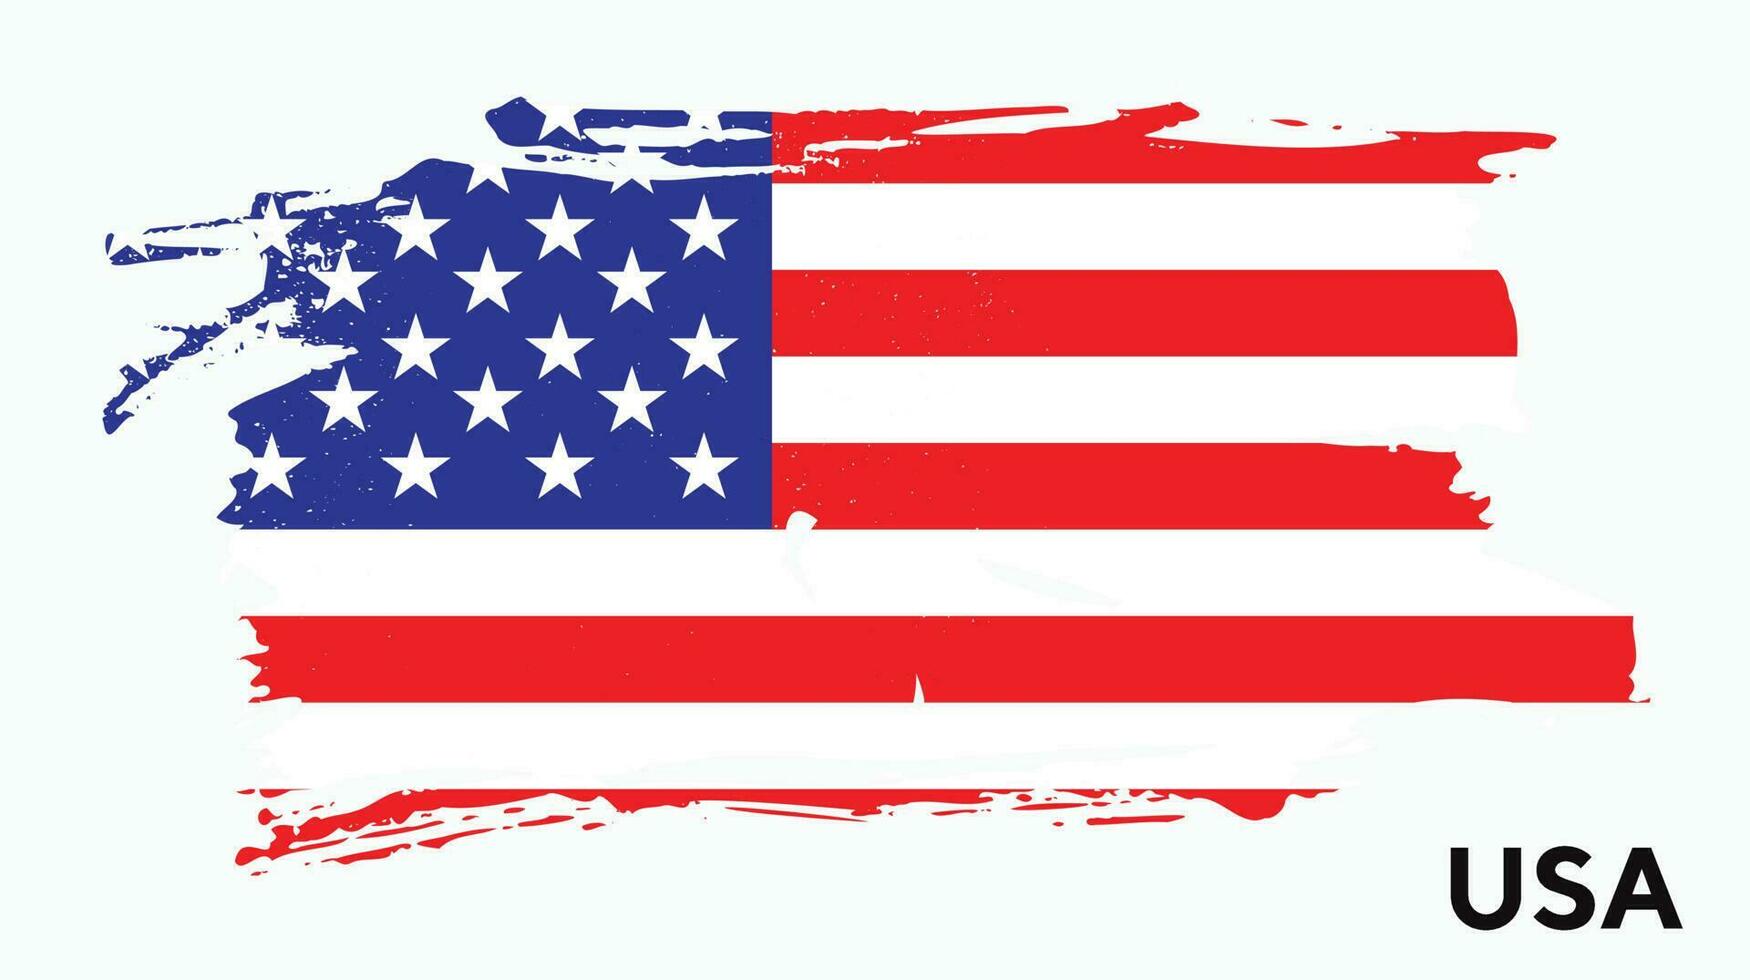 New colorful USA grunge texture flag vector